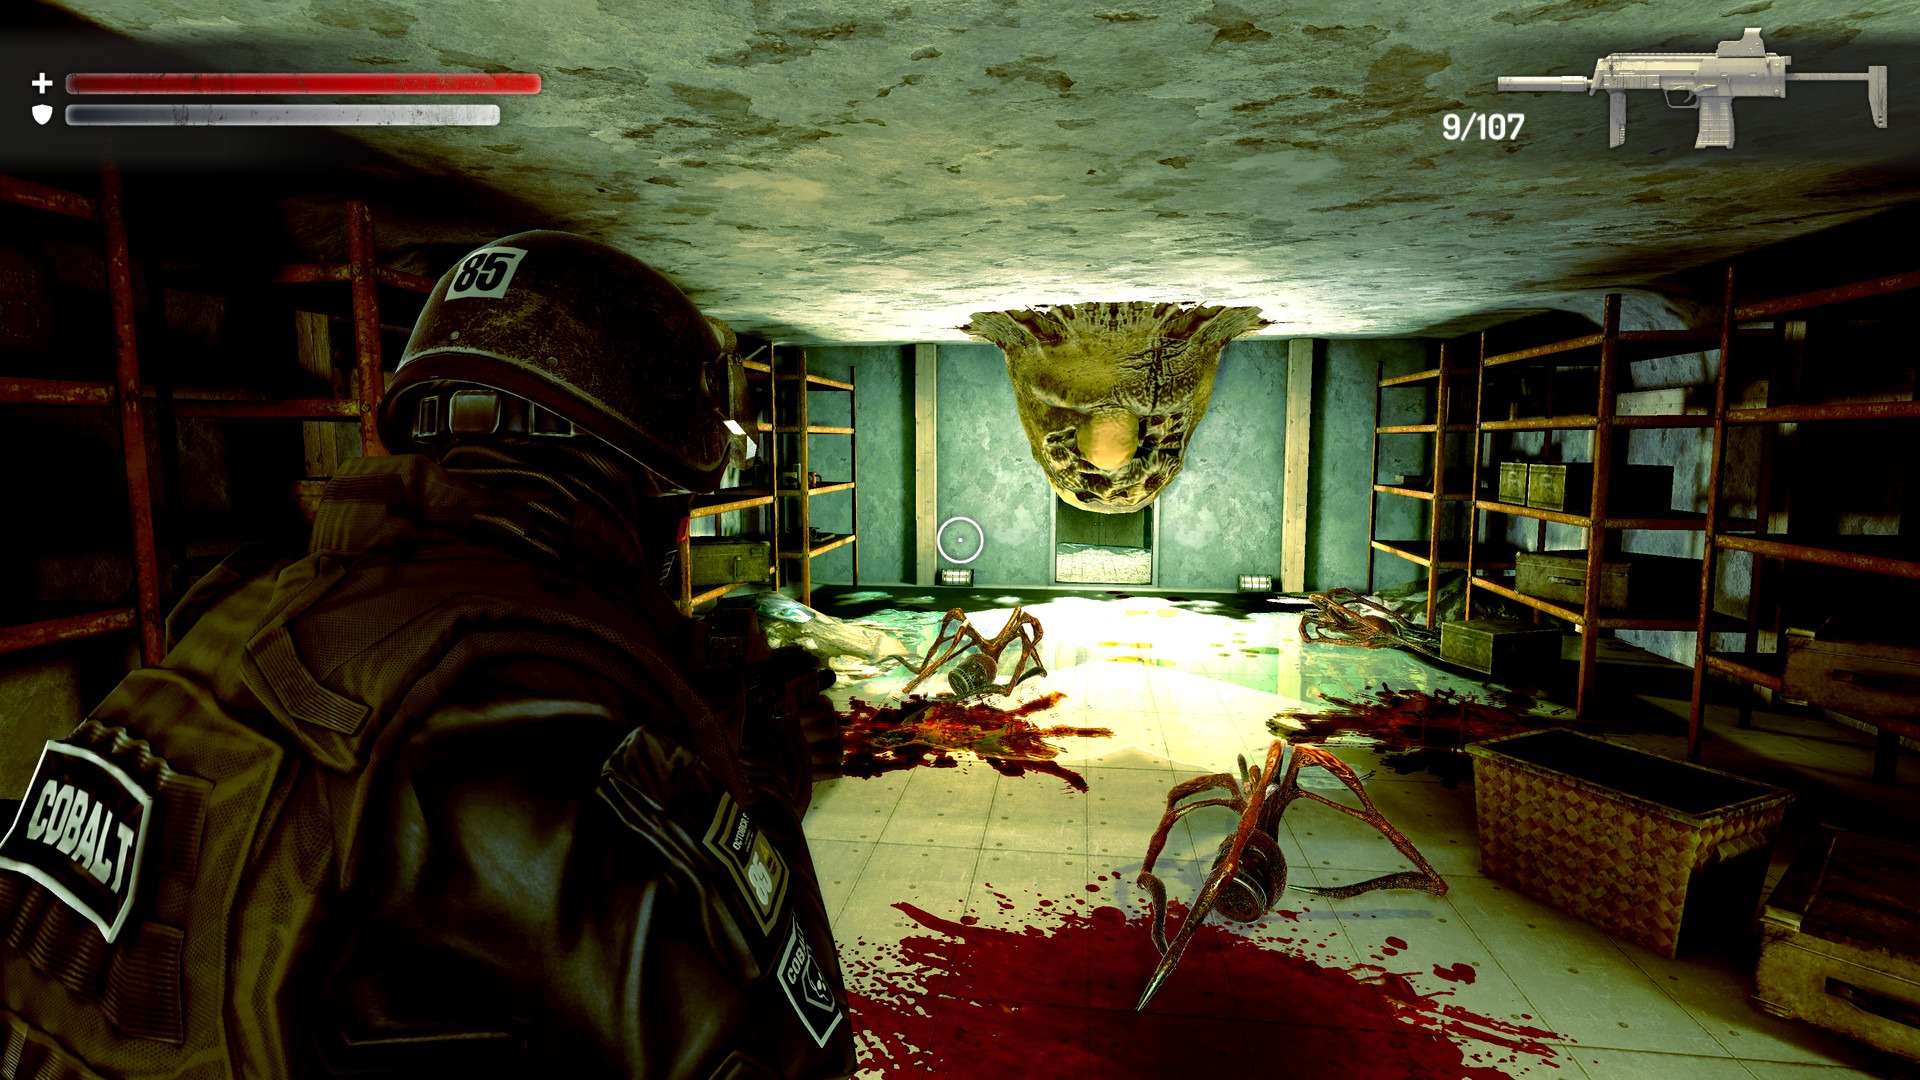 Download Wall of Insanity para pc via torrent